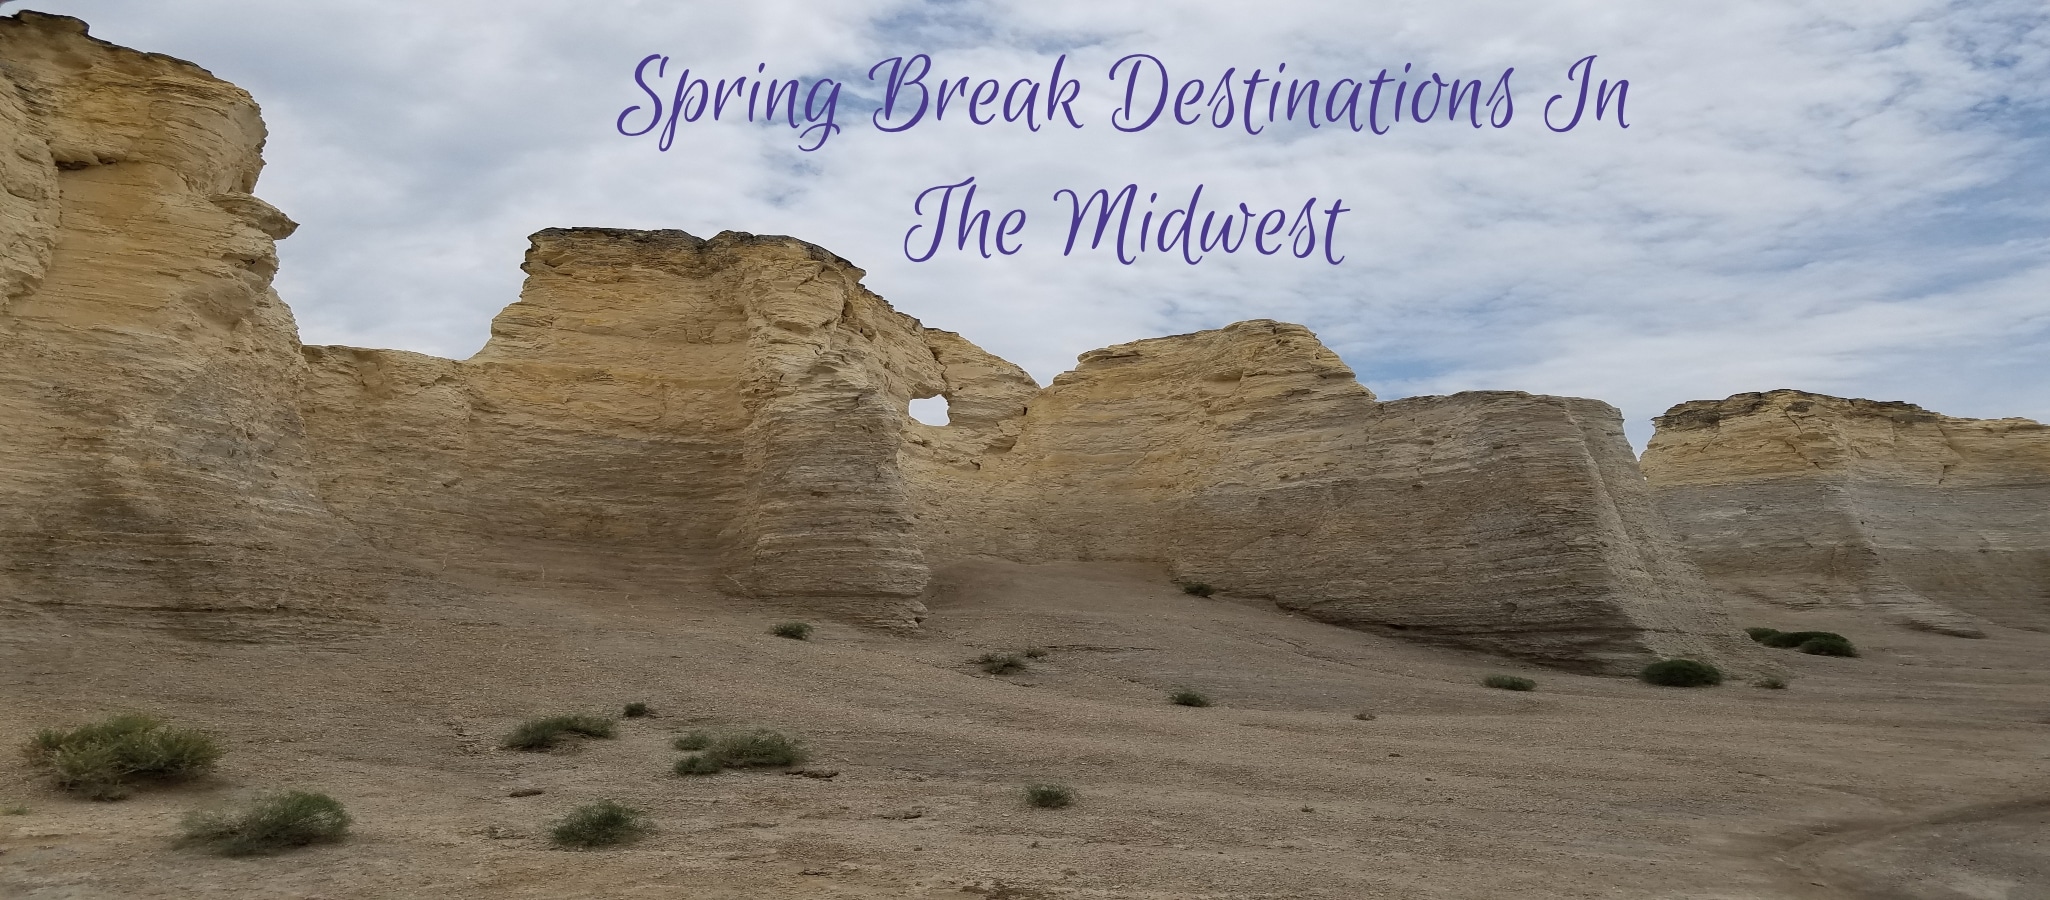 Midwest Spring Break Destination From Travel Experts